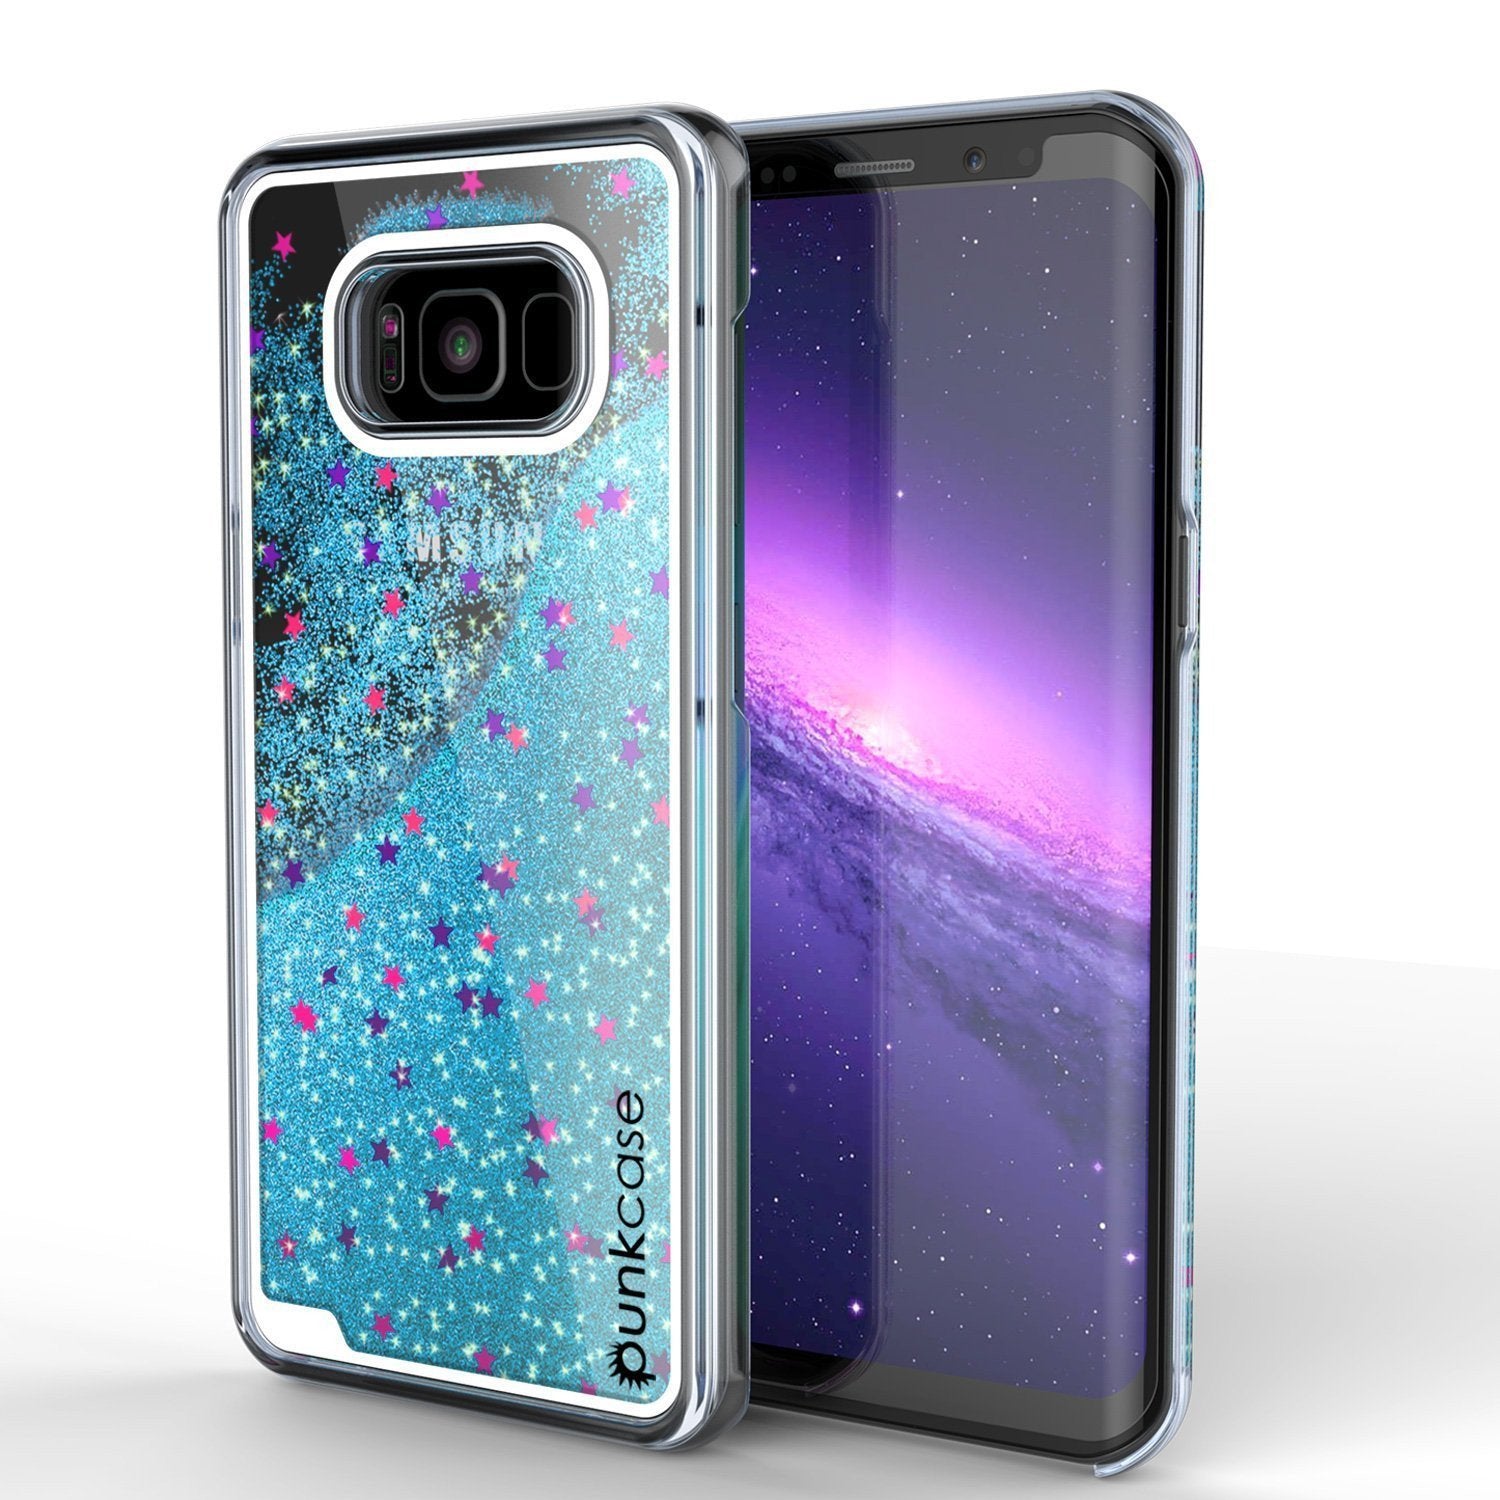 Galaxy S8 Case, Punkcase® Lucid Teal Series | Card Slot | Shield Screen Protector | Ultra Fit